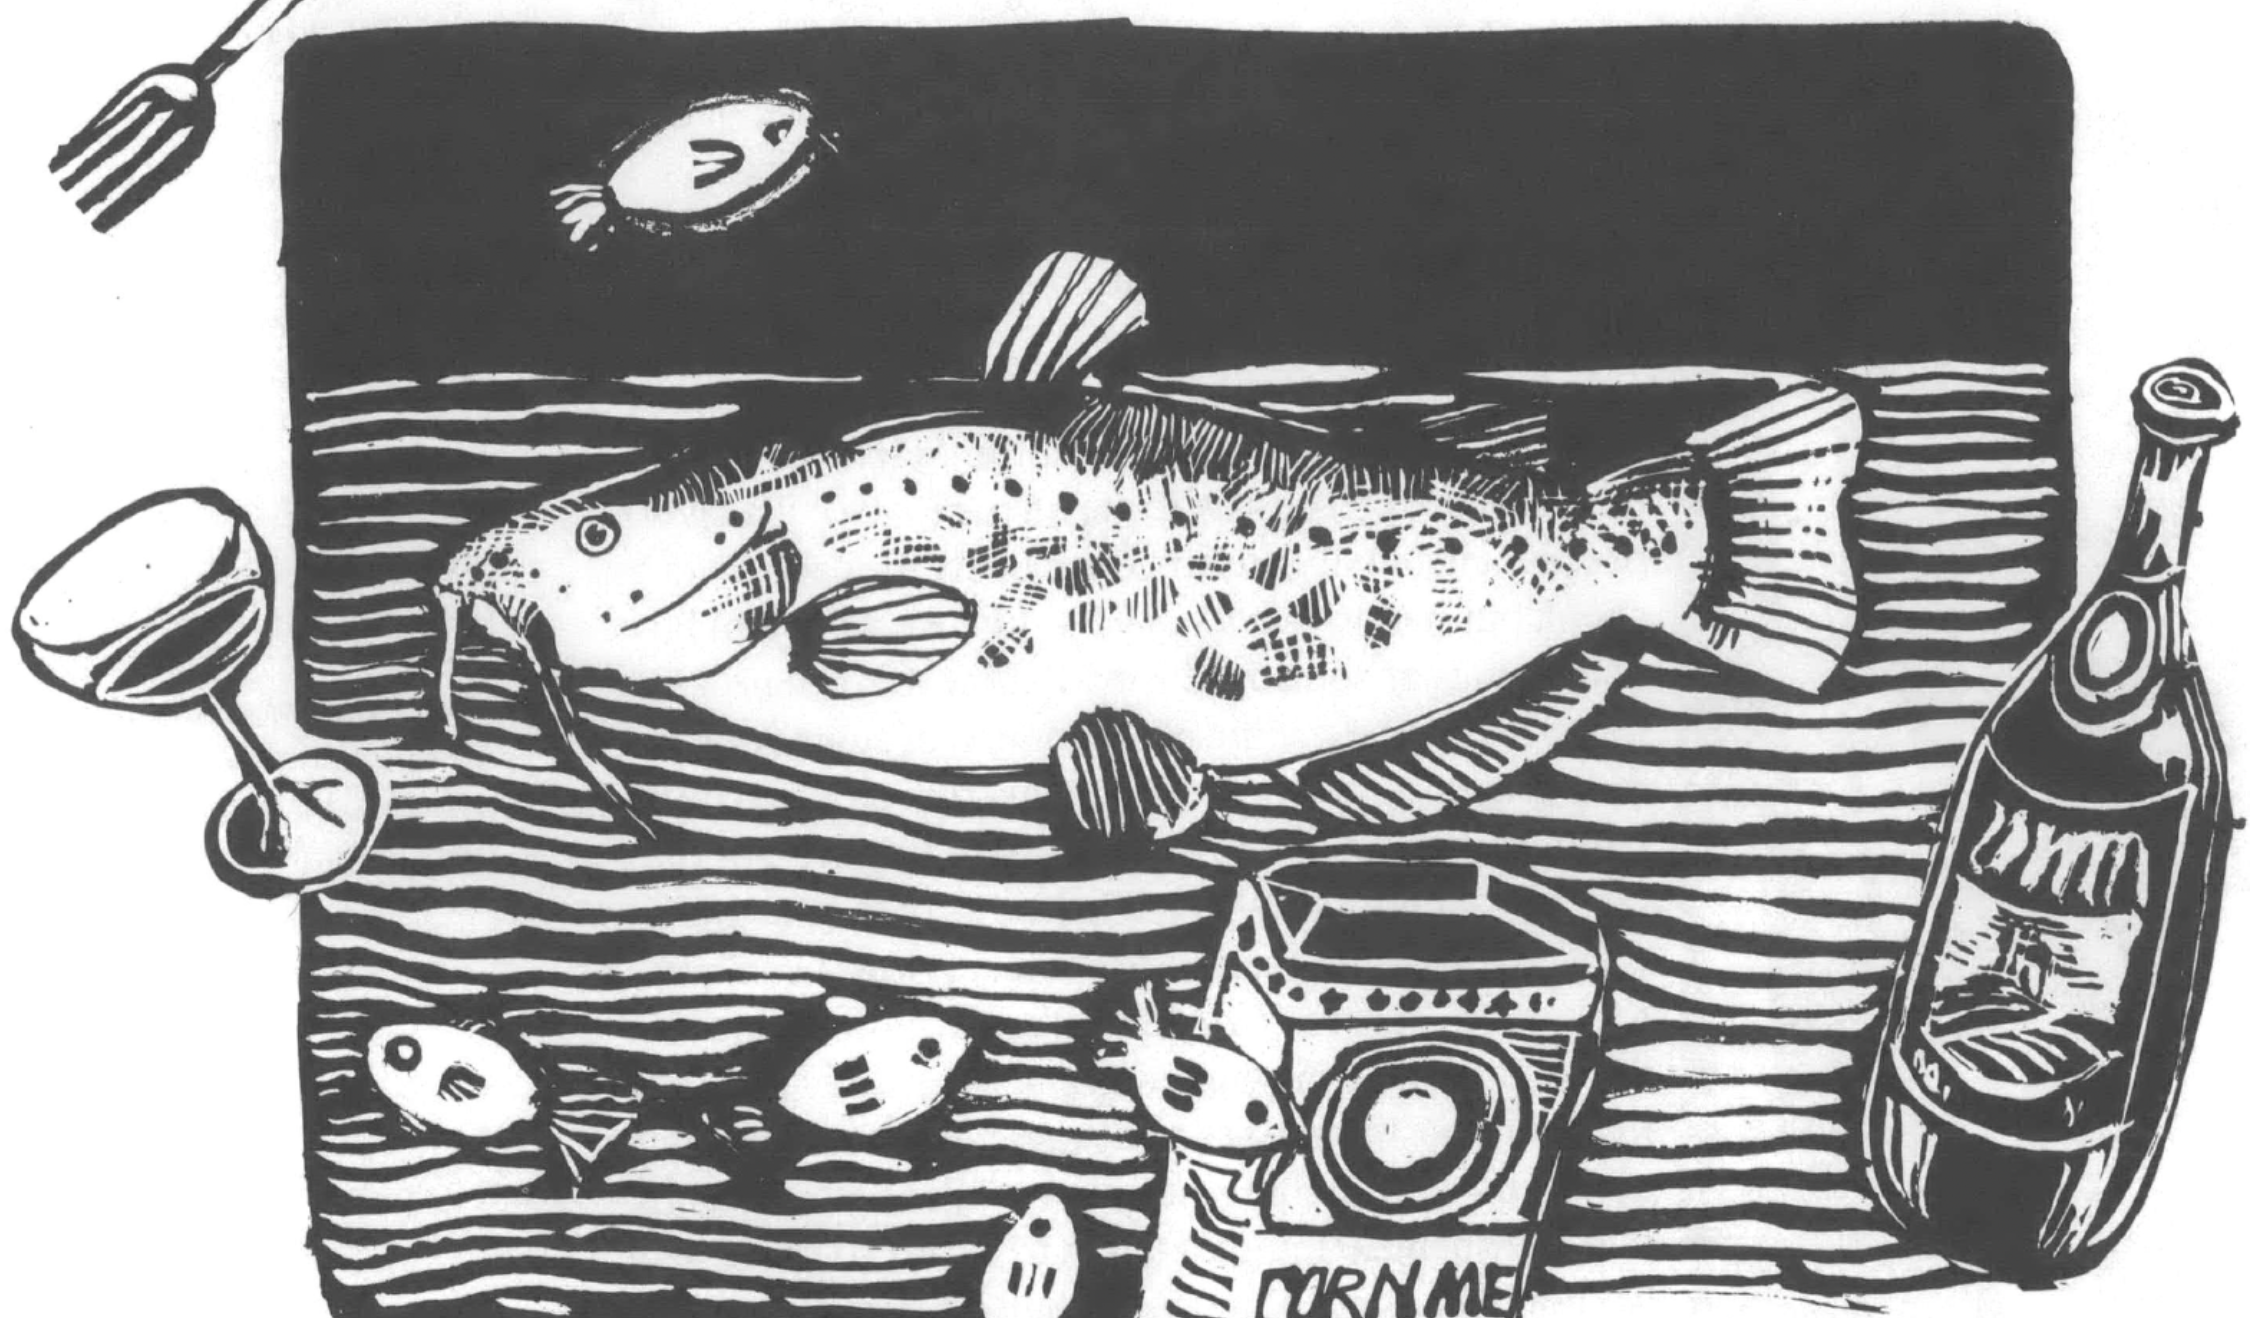 Illustration of large fish and other food and drink